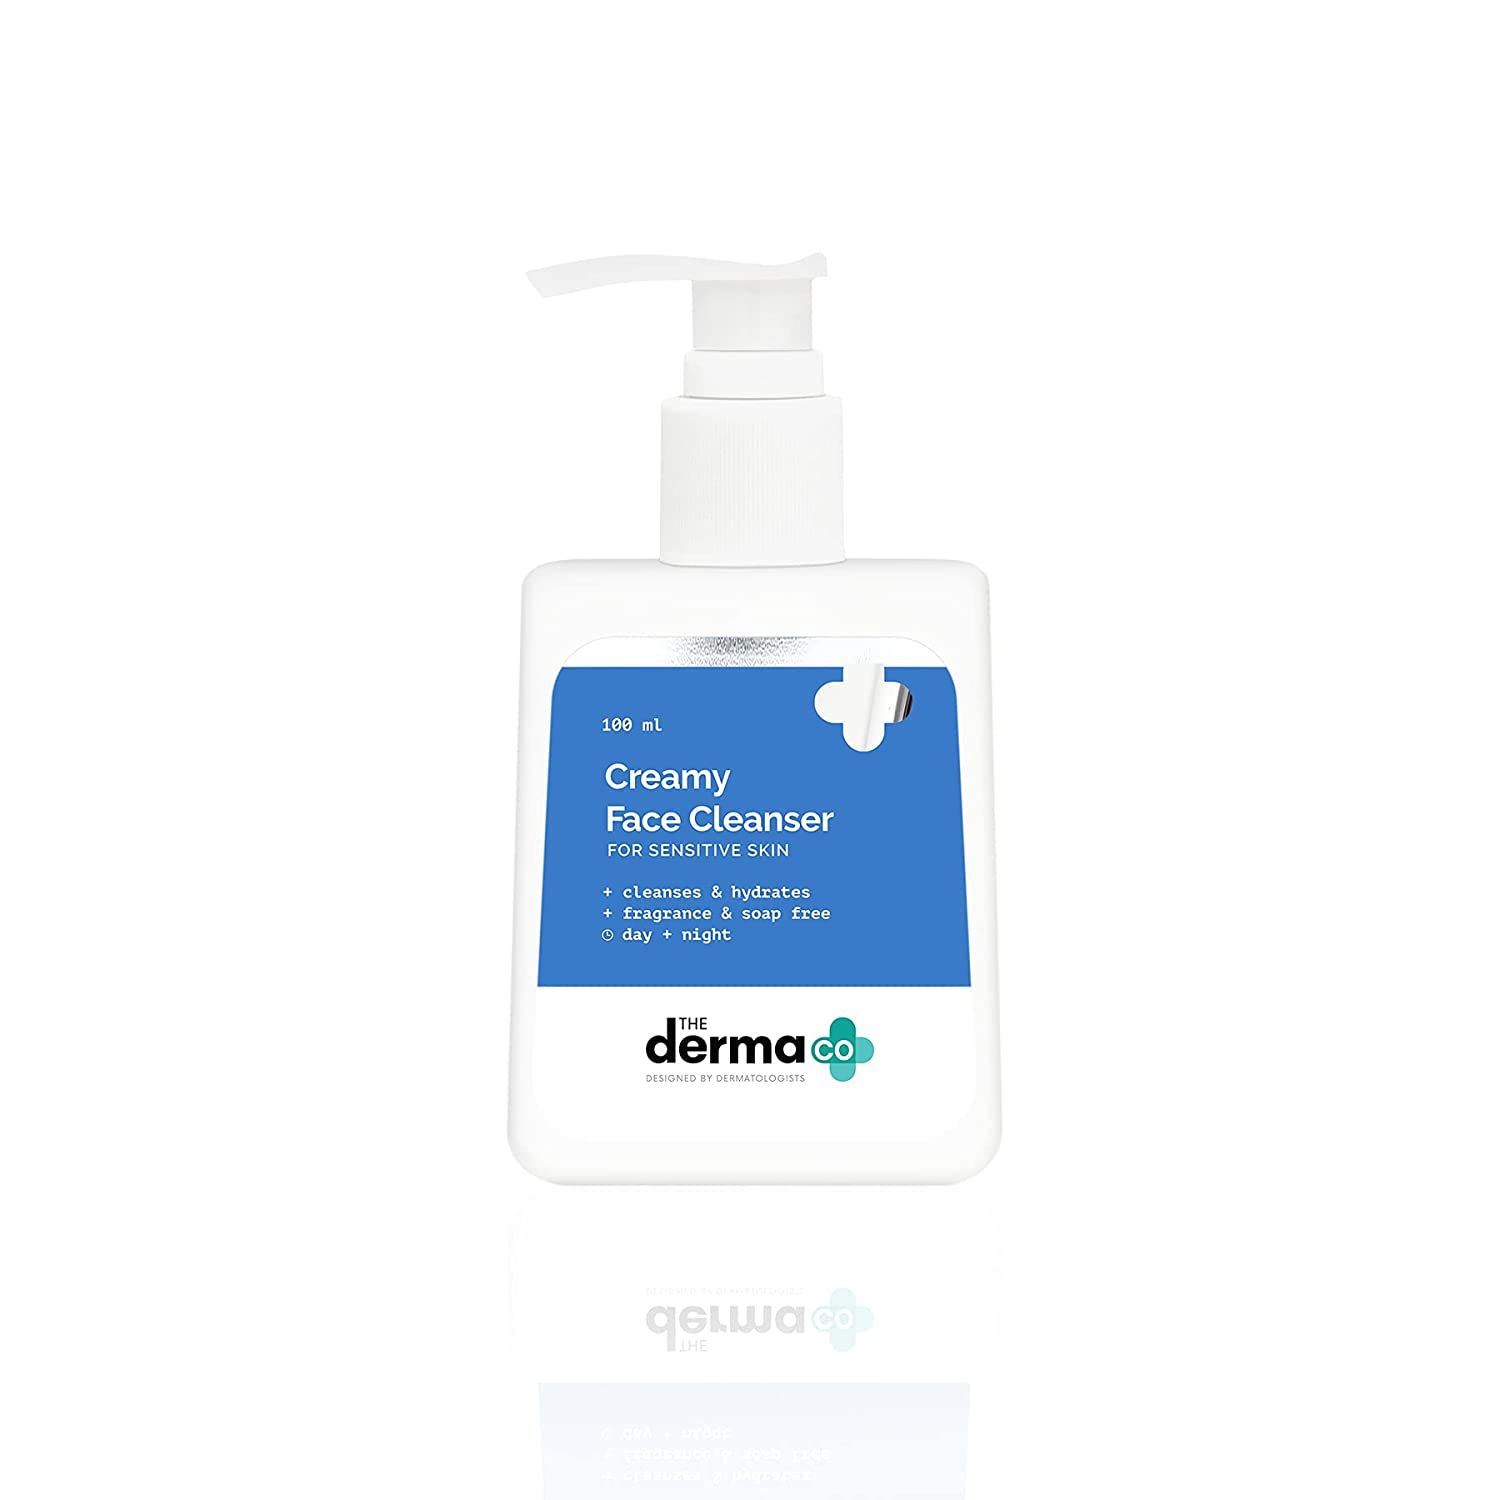 Buy The Derma co. Creamy daily face Cleanser for Sensitive Skin - Purplle